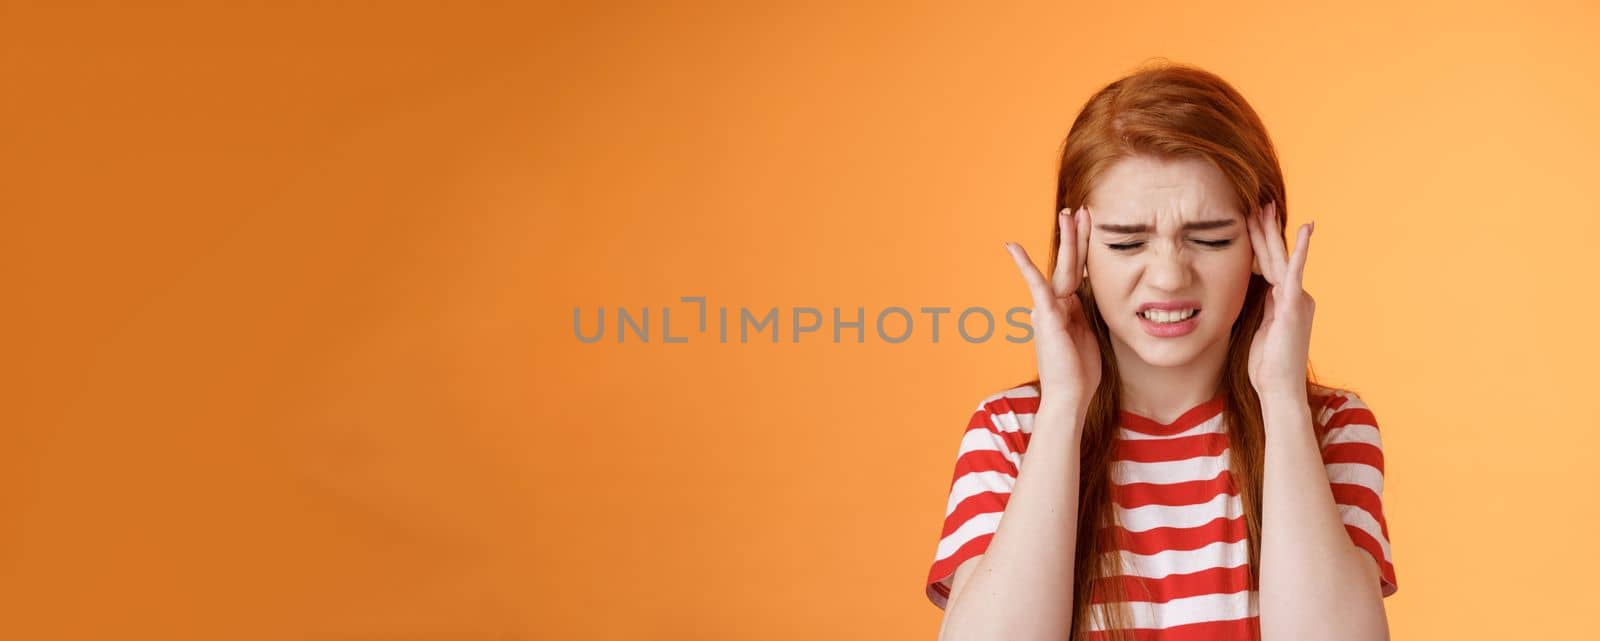 Dizzy uneasy cute redhead female student suffering huge headache, cringe, frowning clench teeth painful feeling, touch temples, feel pain head, awful migraine, asking painkillers, orange background.